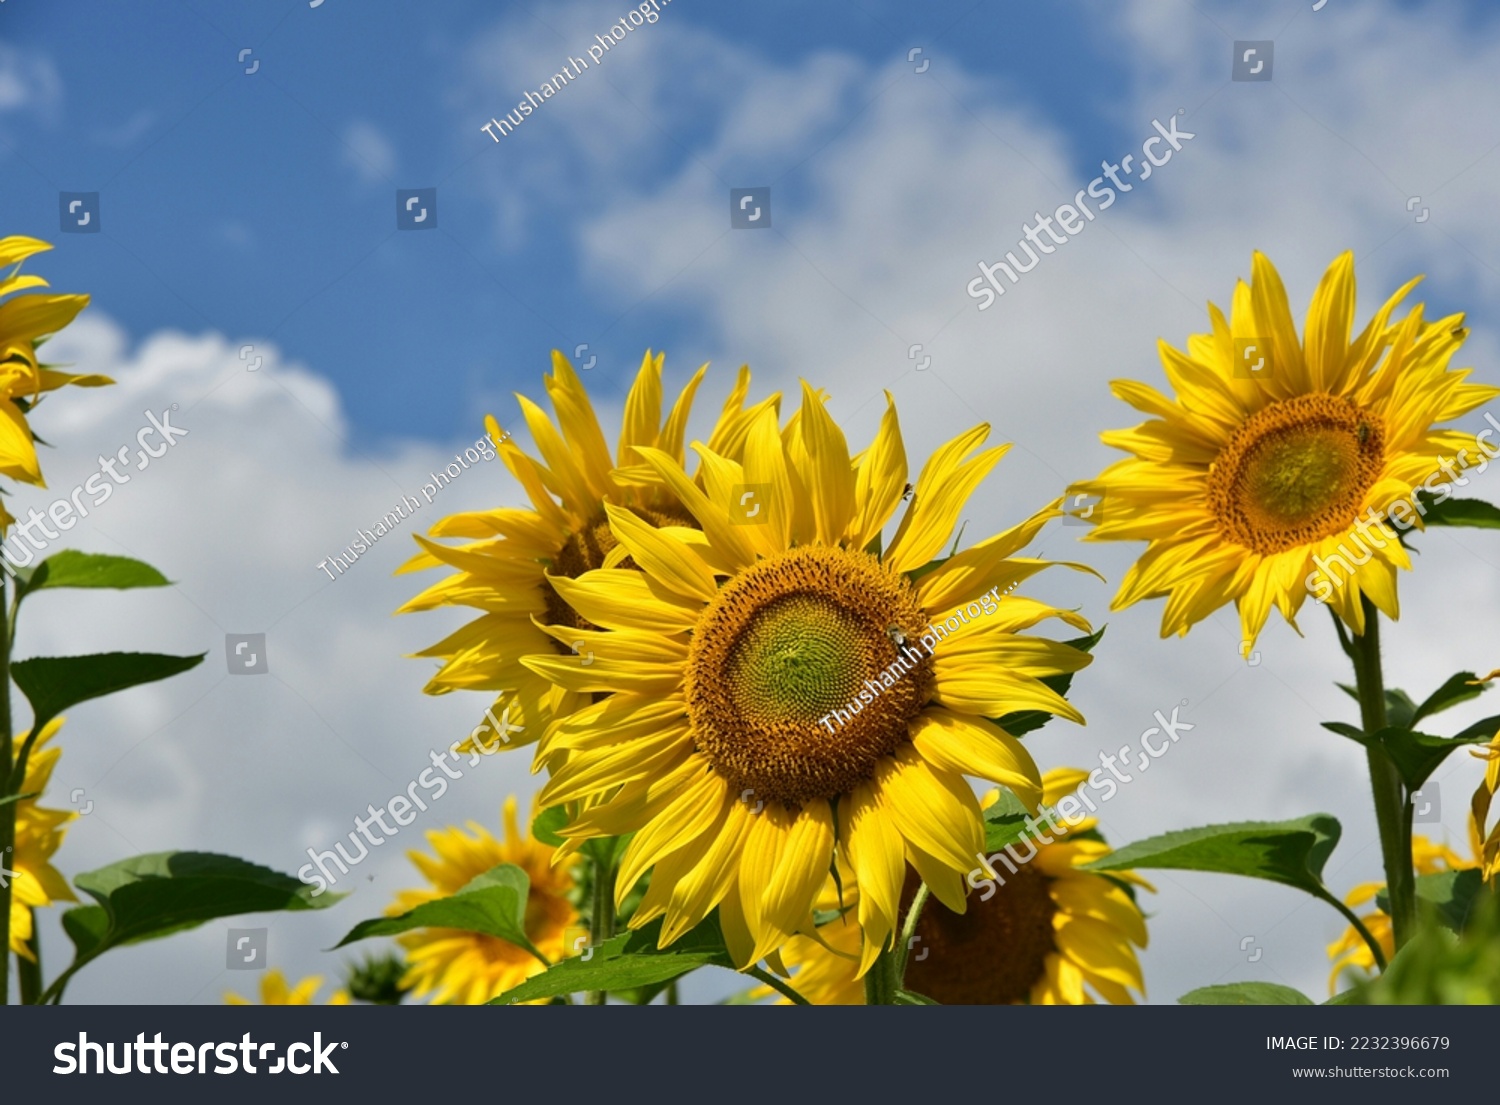 Sunflower natural background, Sunflower blooming, Sunflower oil improves skin health and promote cell regeneration #2232396679